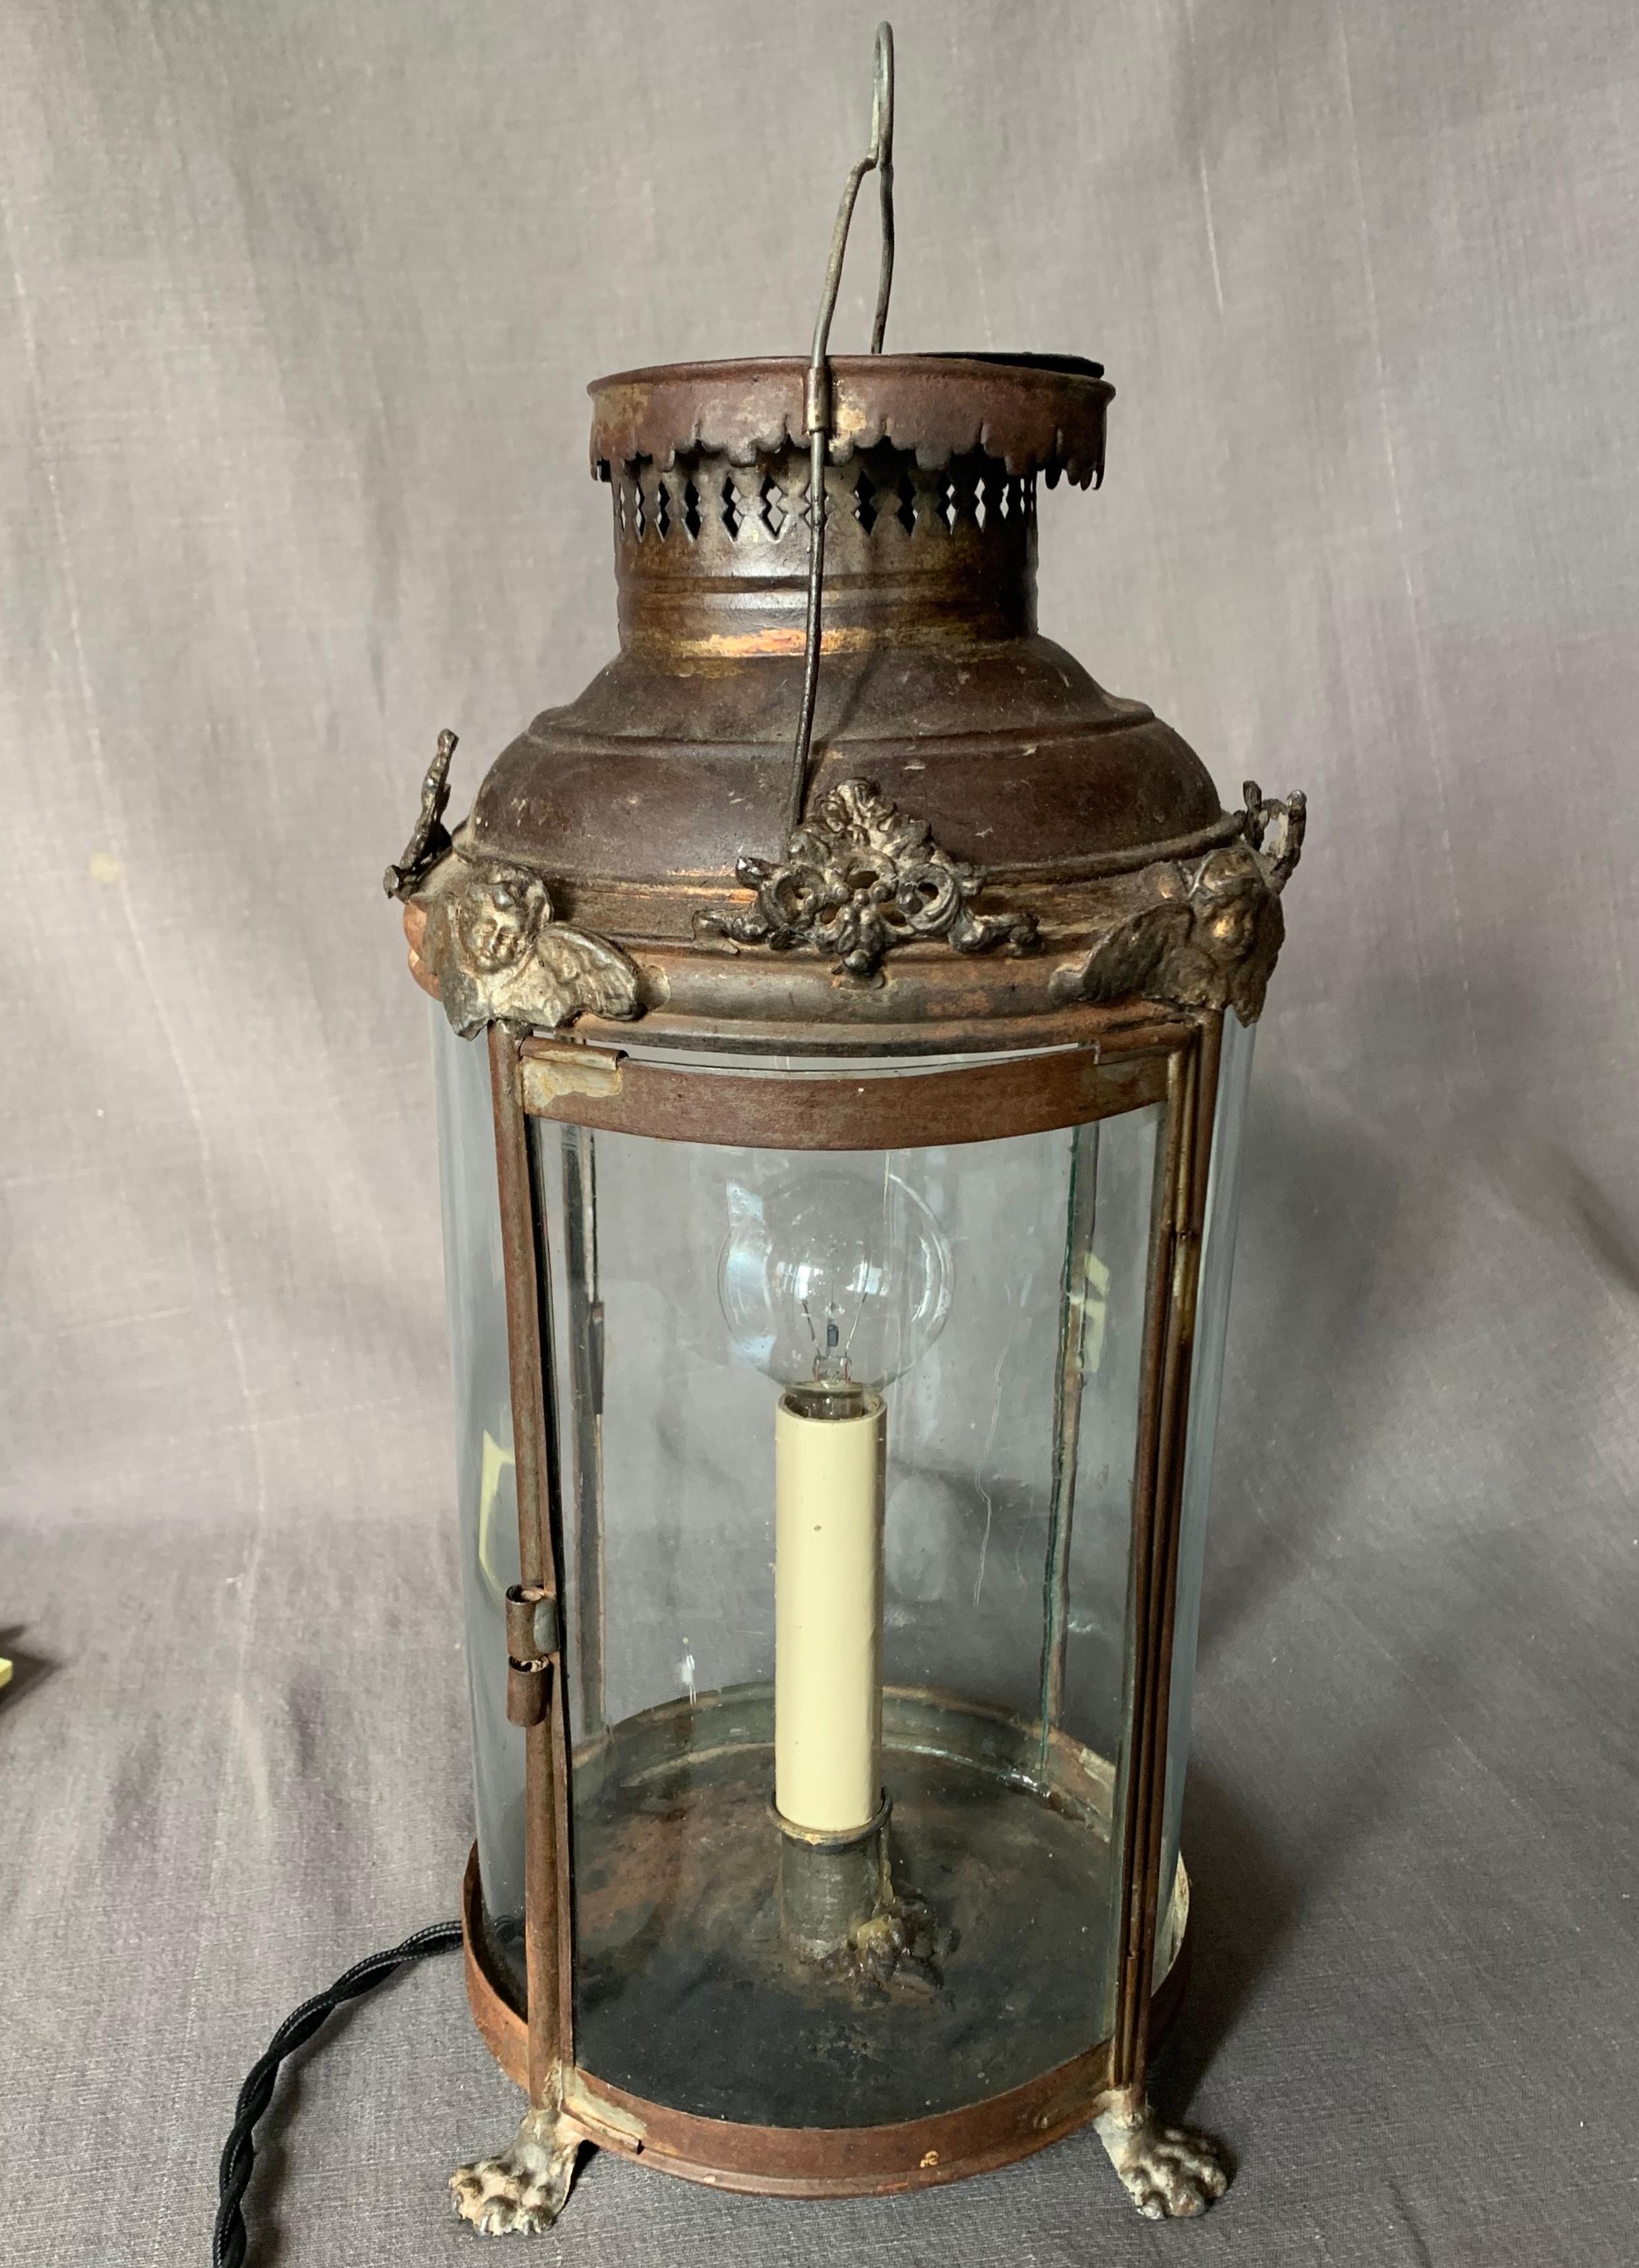 French tole lantern lamp. Antique brown patinated tole footed lantern candle stand with original early seeded curving glass panels with pierced ventilation cap surmounted with cherubs and foliate scrollwork, newly electrified with twisted silk cord